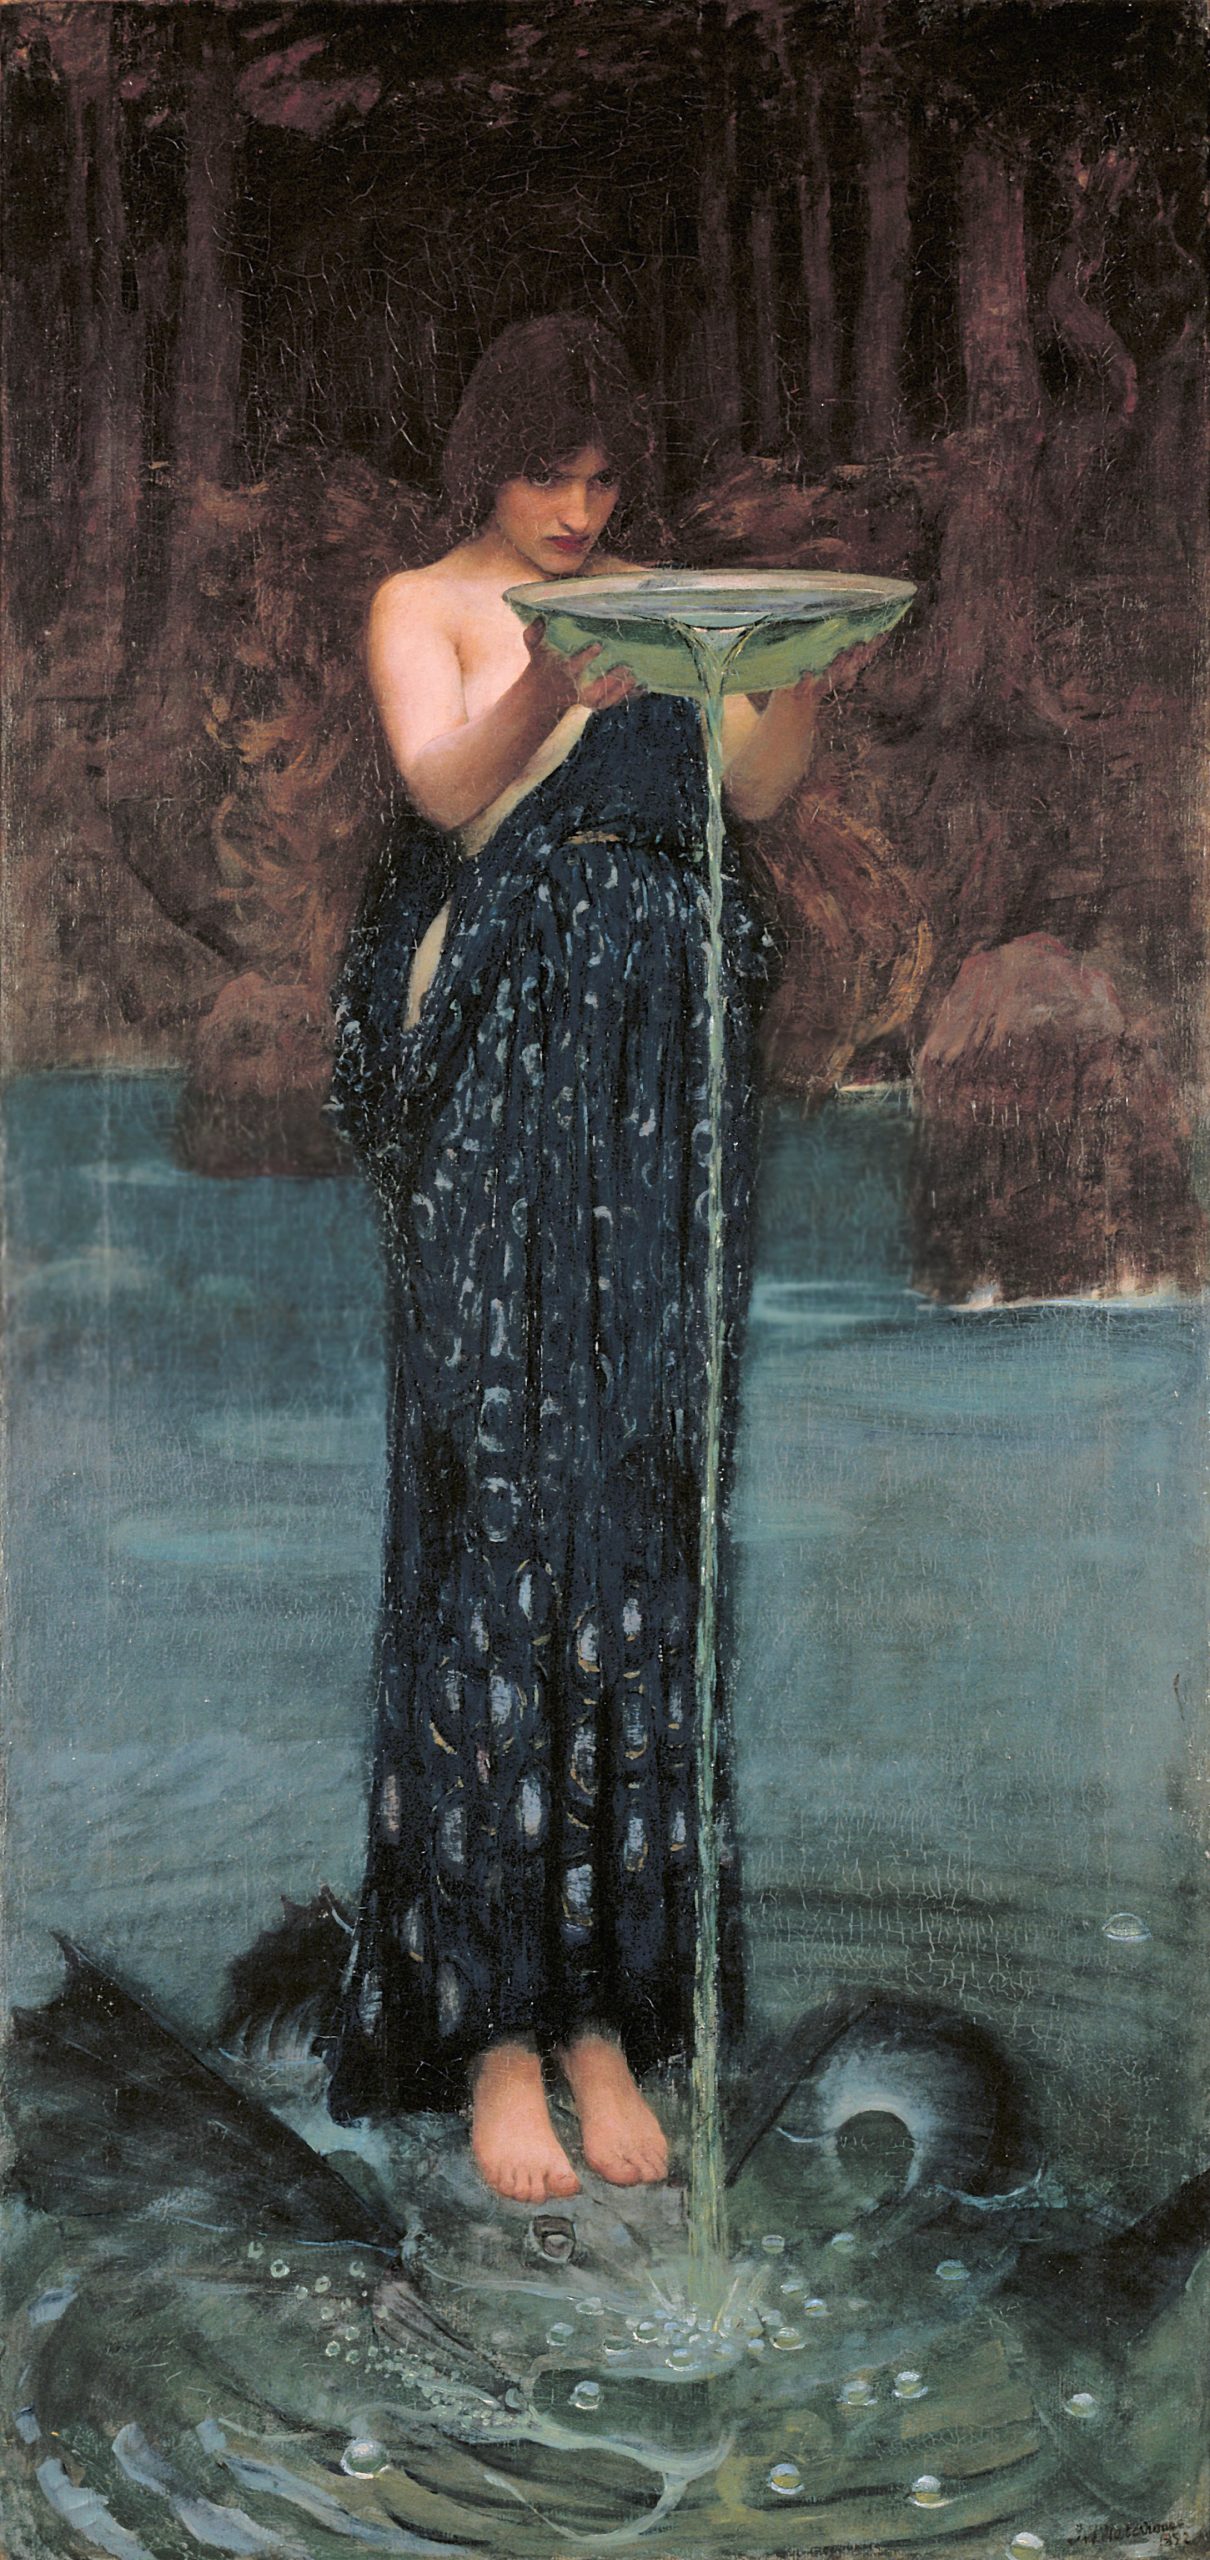 A painting of a woman holding a basin of water in her hands as it pours out. She is standing in what it looks to be a cave with shallow water. The woman is wearing a dark blue dress with a faint pattern.